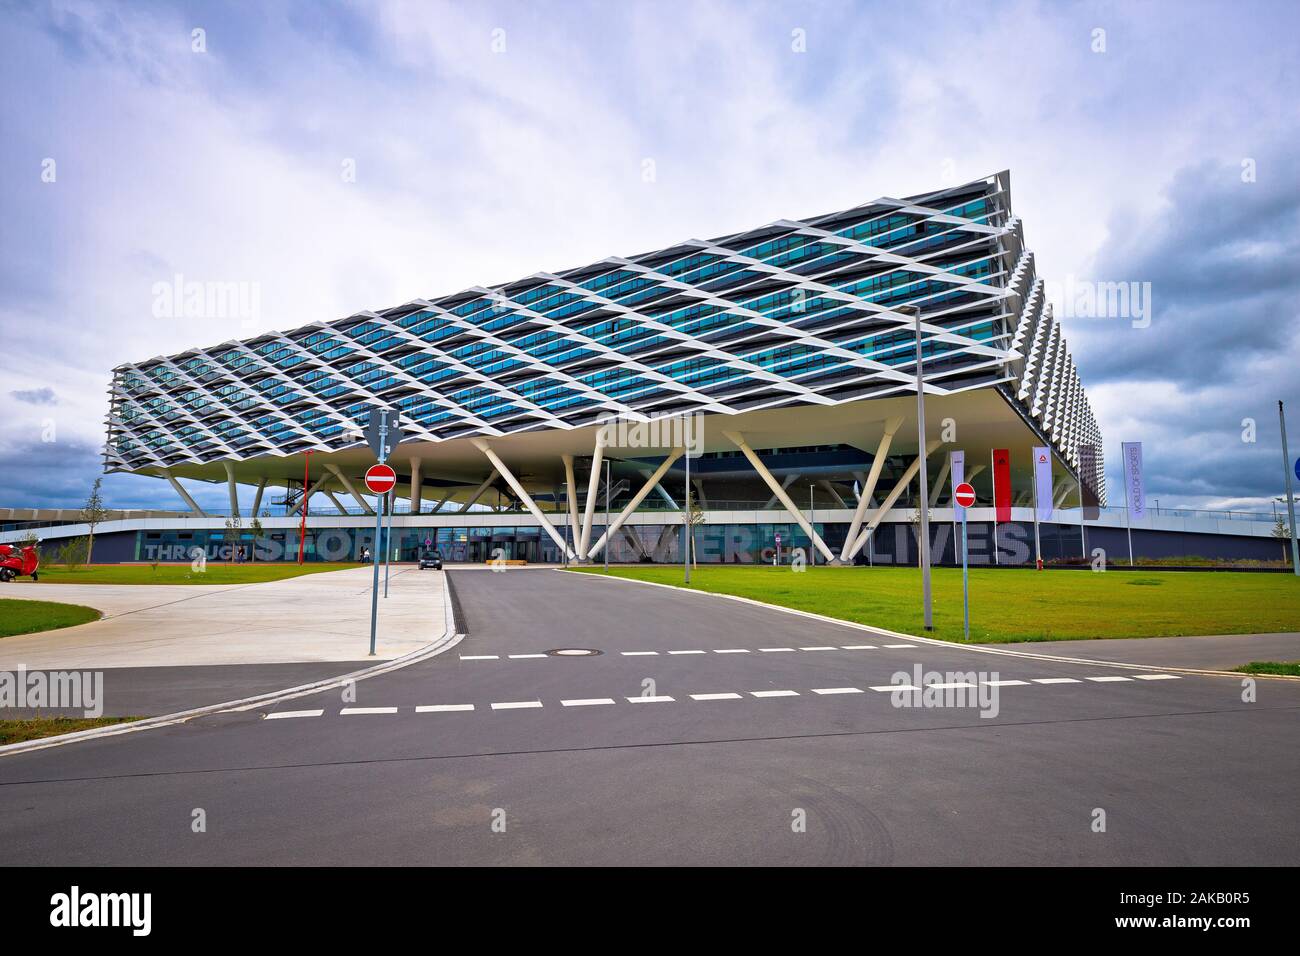 Herzogenaurach, Germany, September 2019: Adidas headquarter futuristic World of Sports buildings view. Herzogenaurach is town in Germany in which A Stock Photo - Alamy